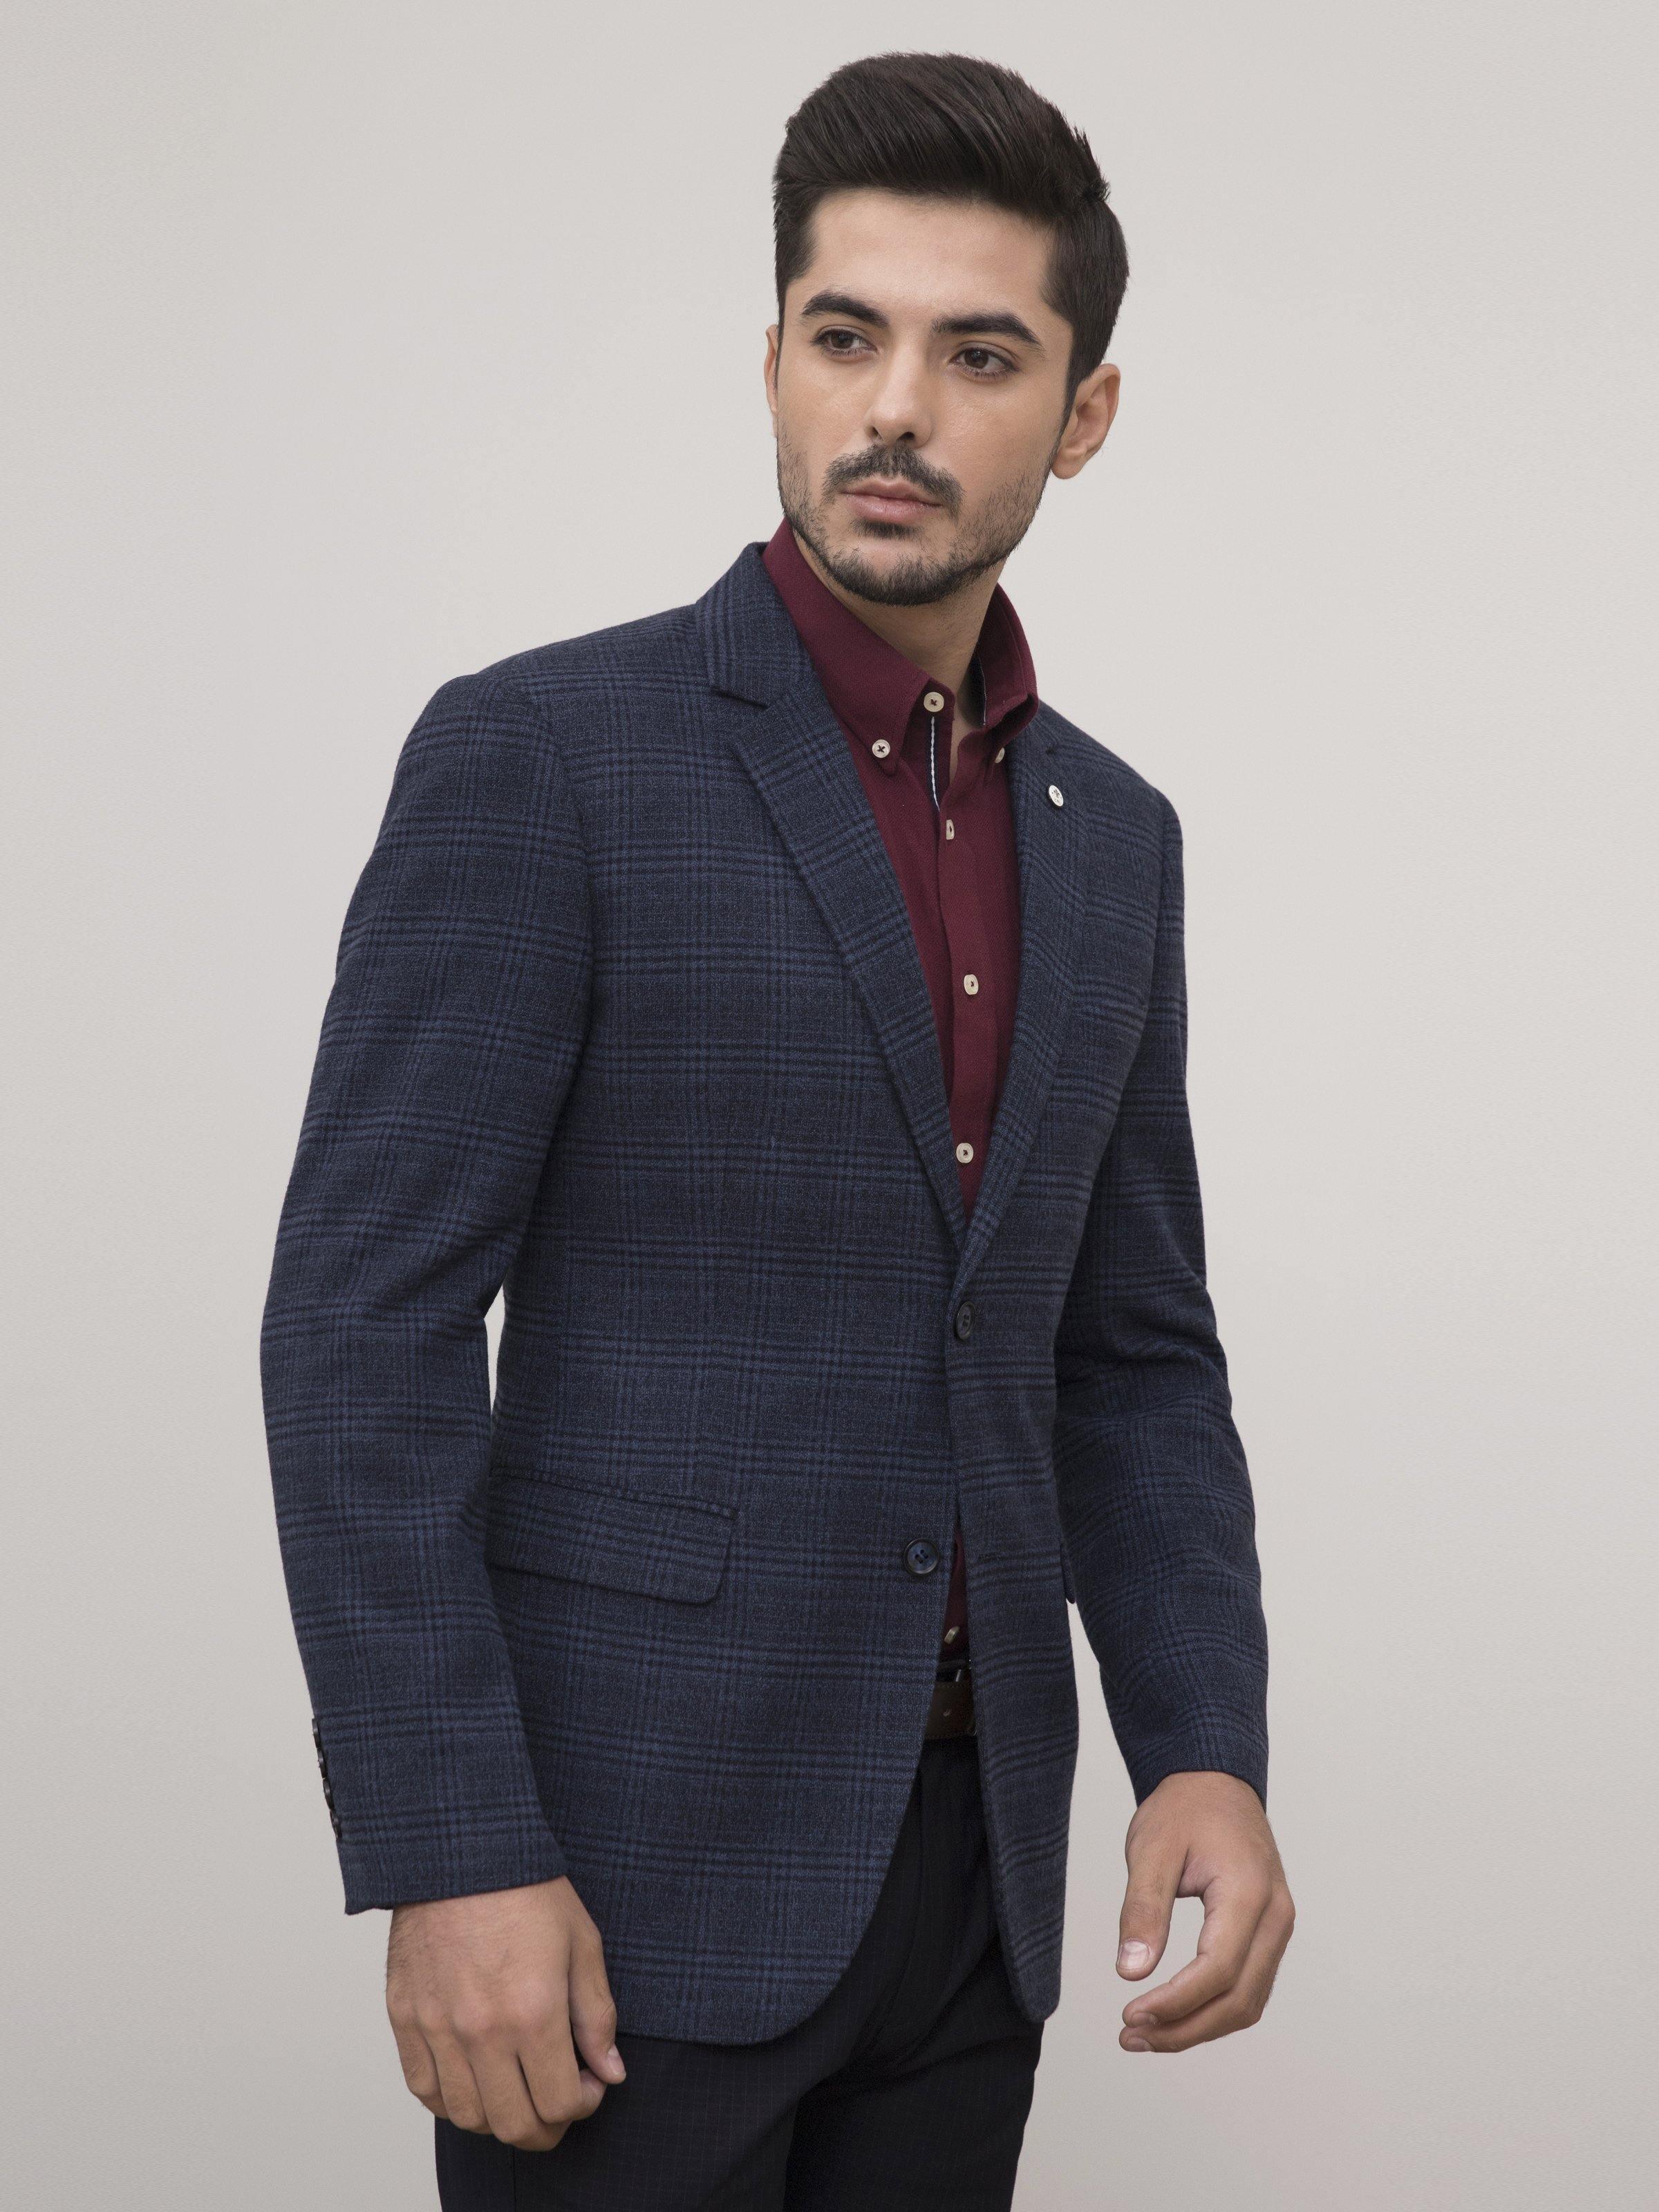 WOOLEN COAT 2 BUTTON SLIM FIT NAVY BLUE at Charcoal Clothing